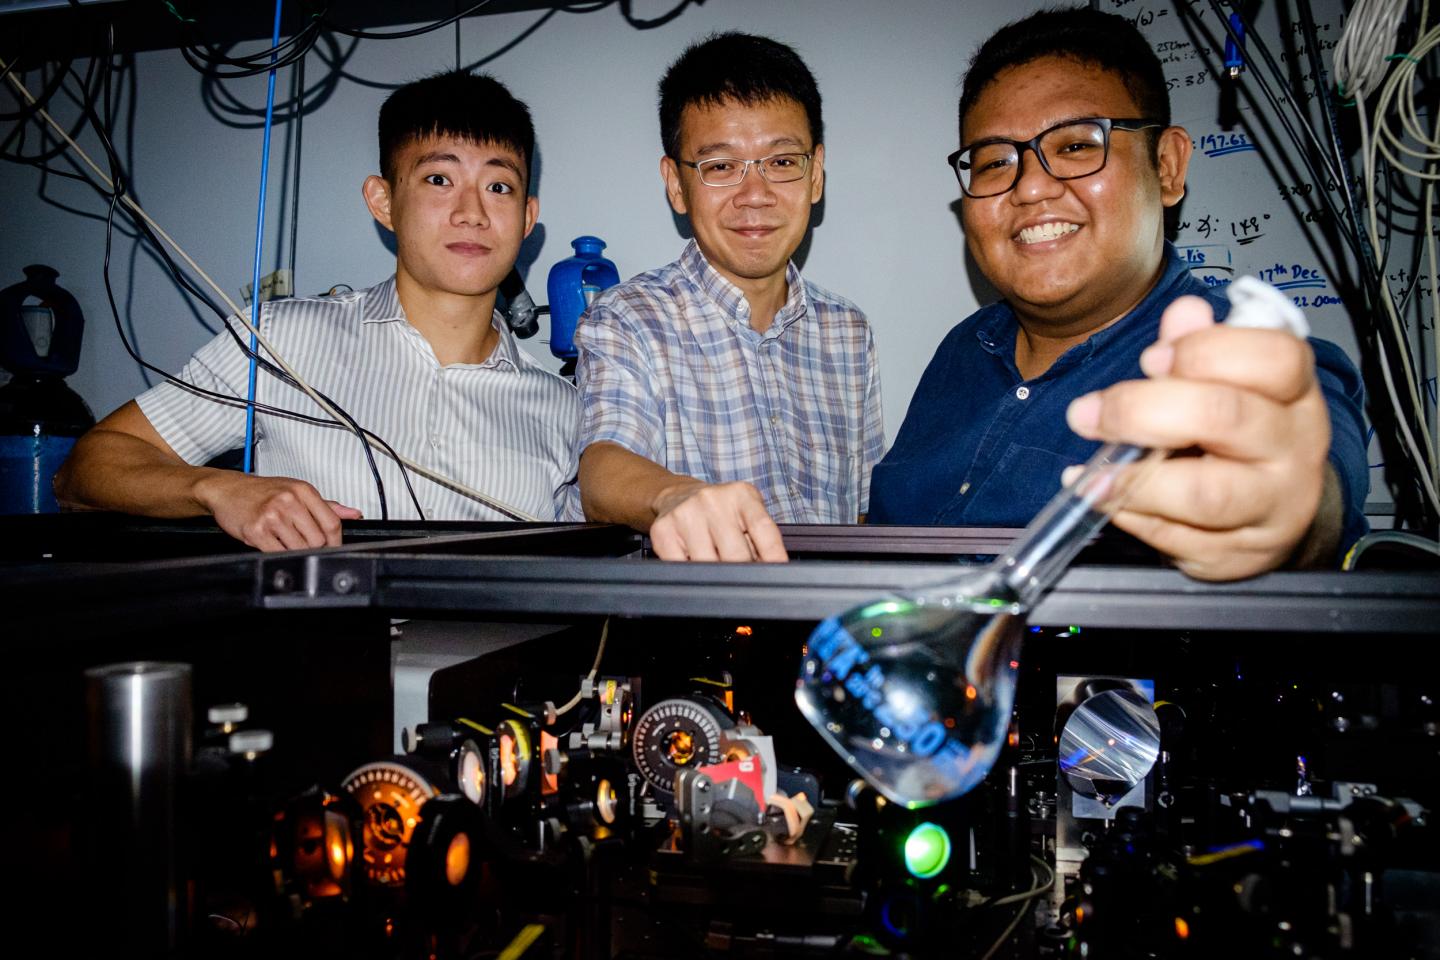 Loh Zhi-Heng with his NTU Research Team, Where They Are Conducting Tabletop Experiments on Water